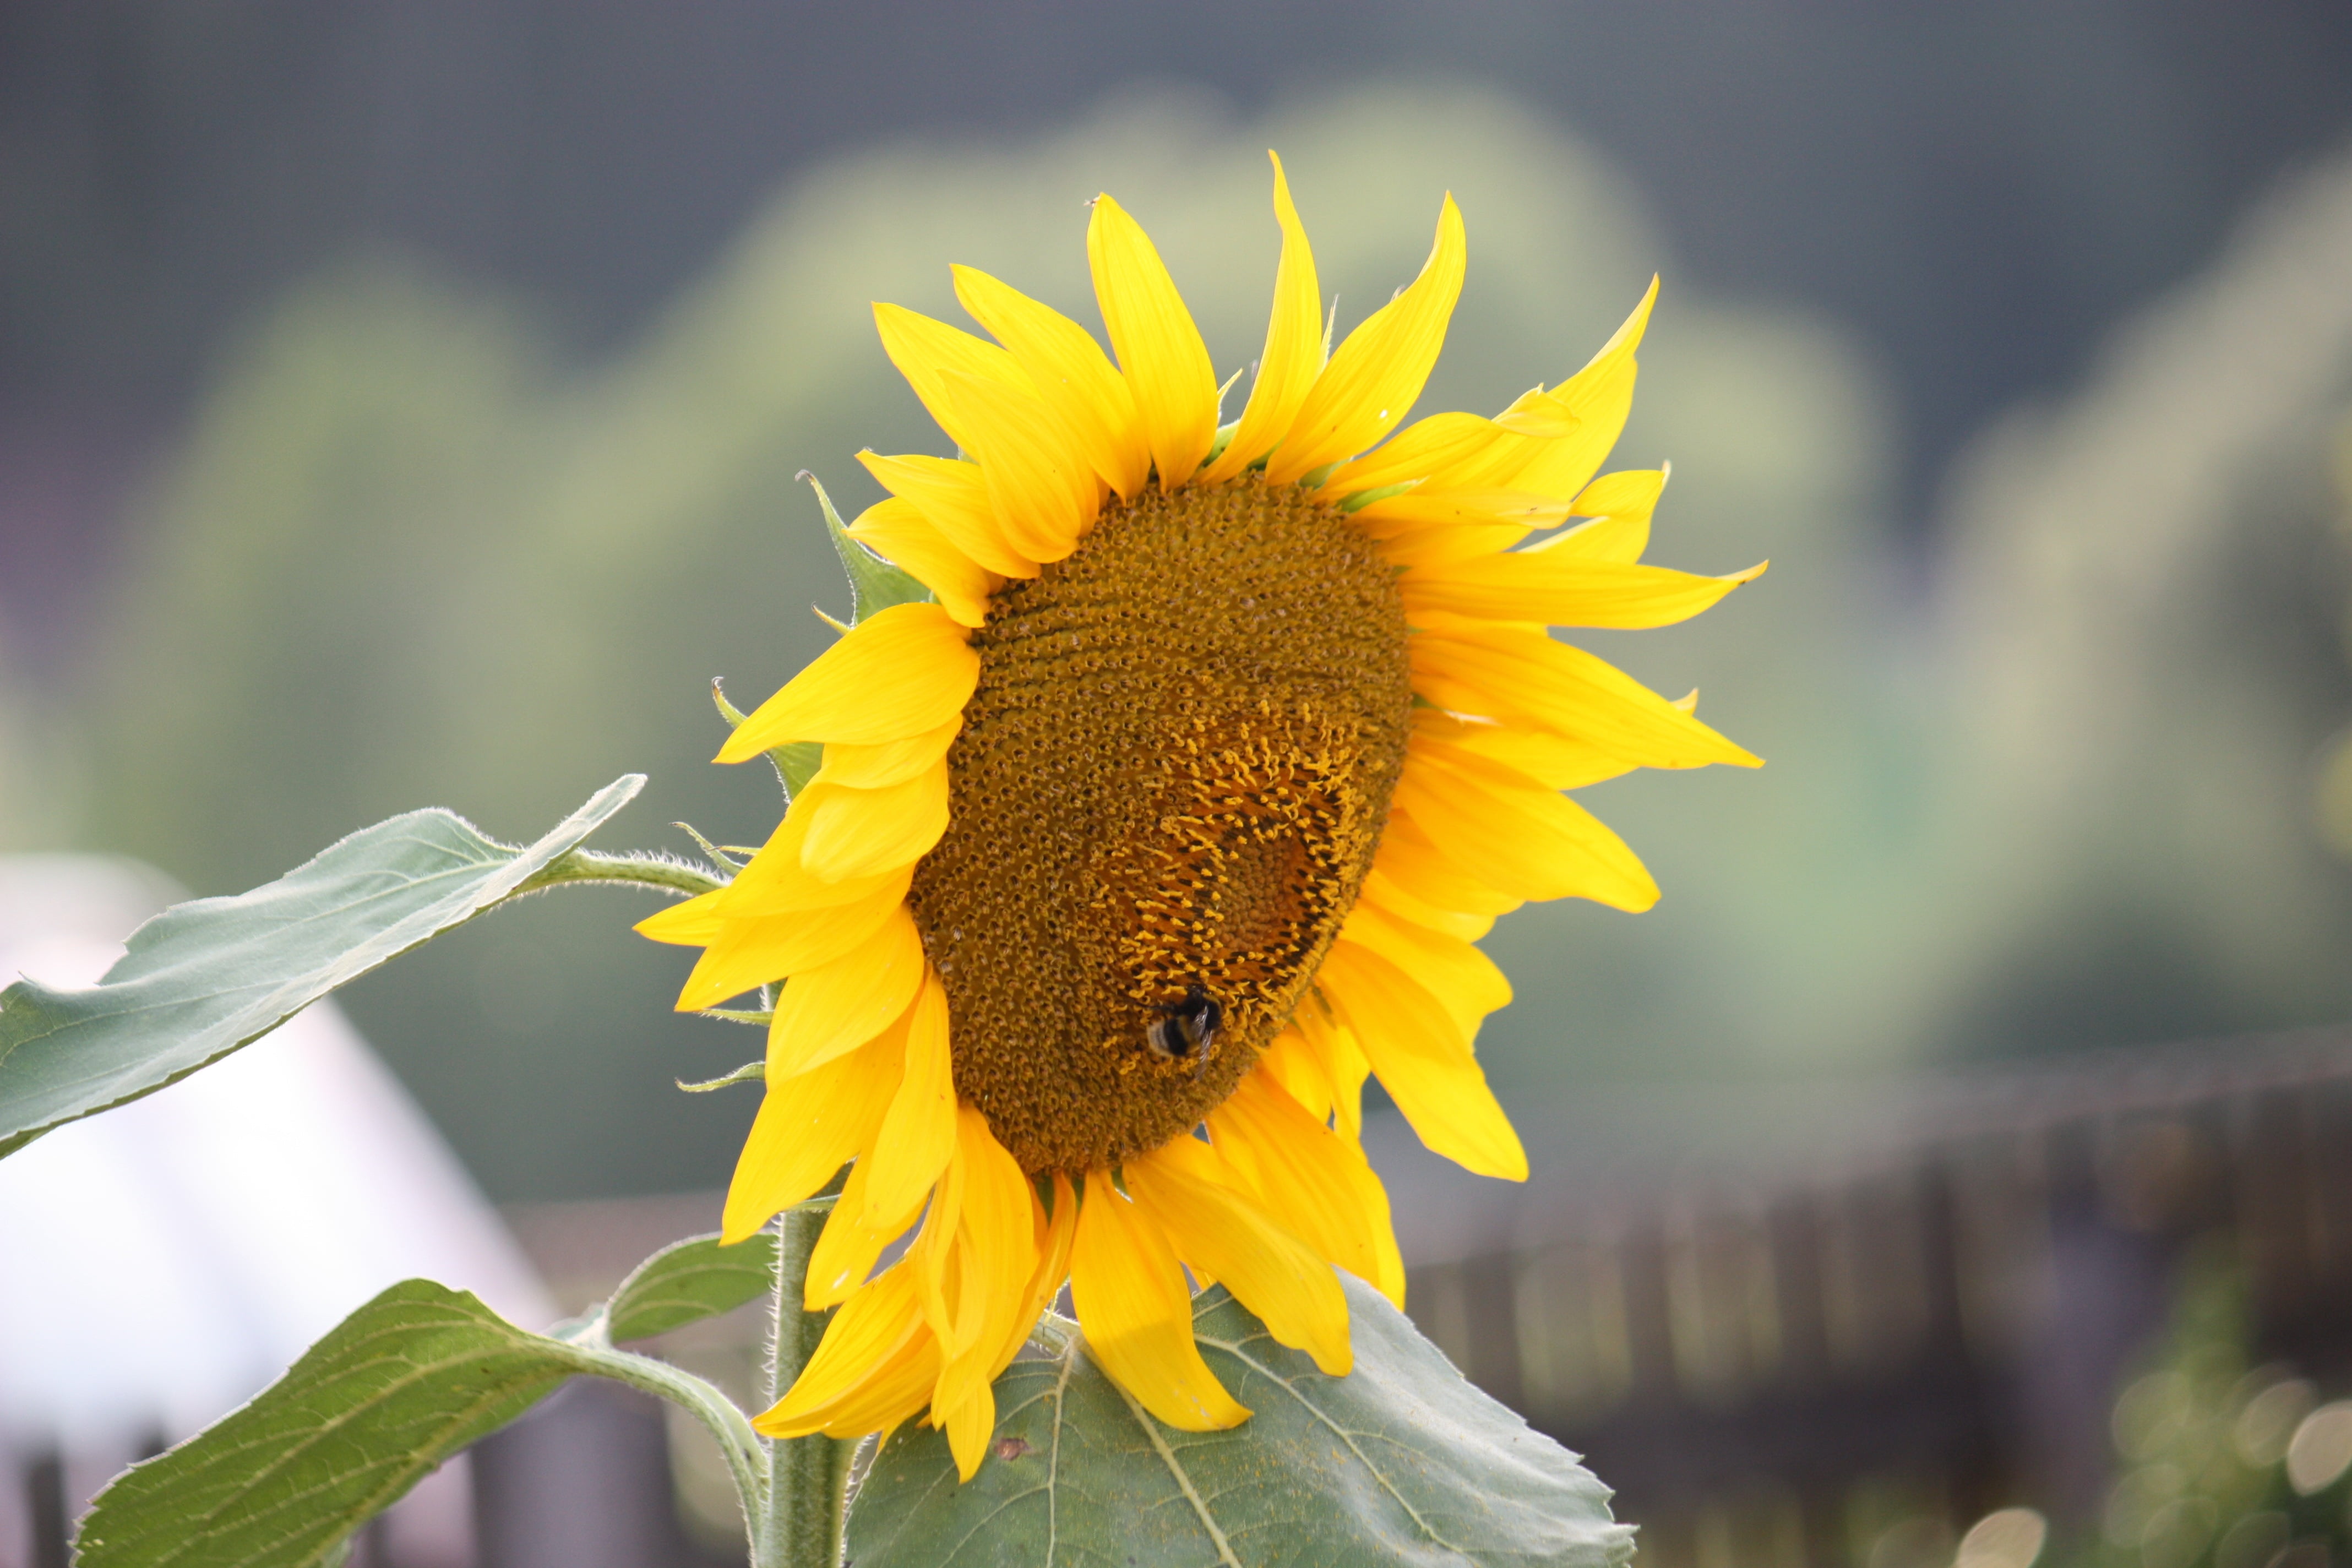 Close up photo of Sunflower during daytime HD wallpaper | Wallpaper ...